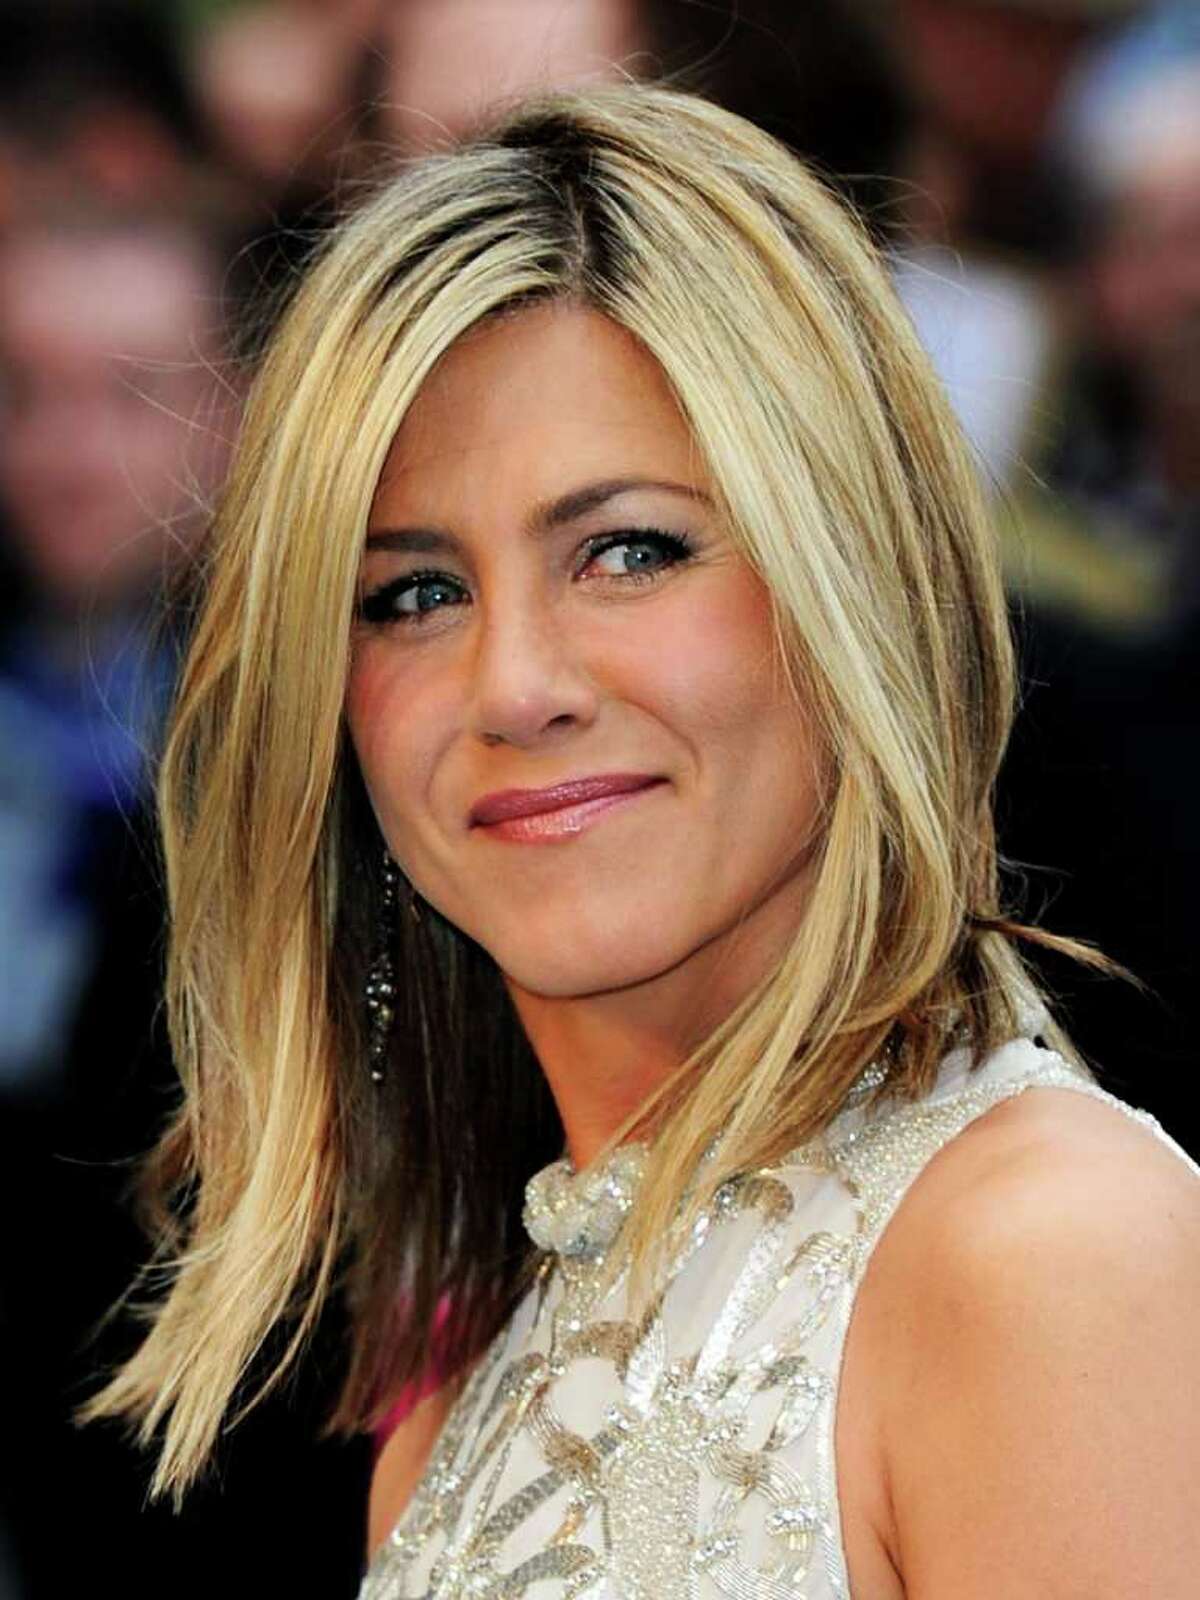 Actress Jennifer Aniston attends the UK film premiere of "Horrible Bosses" at BFI Southbank in London, England.